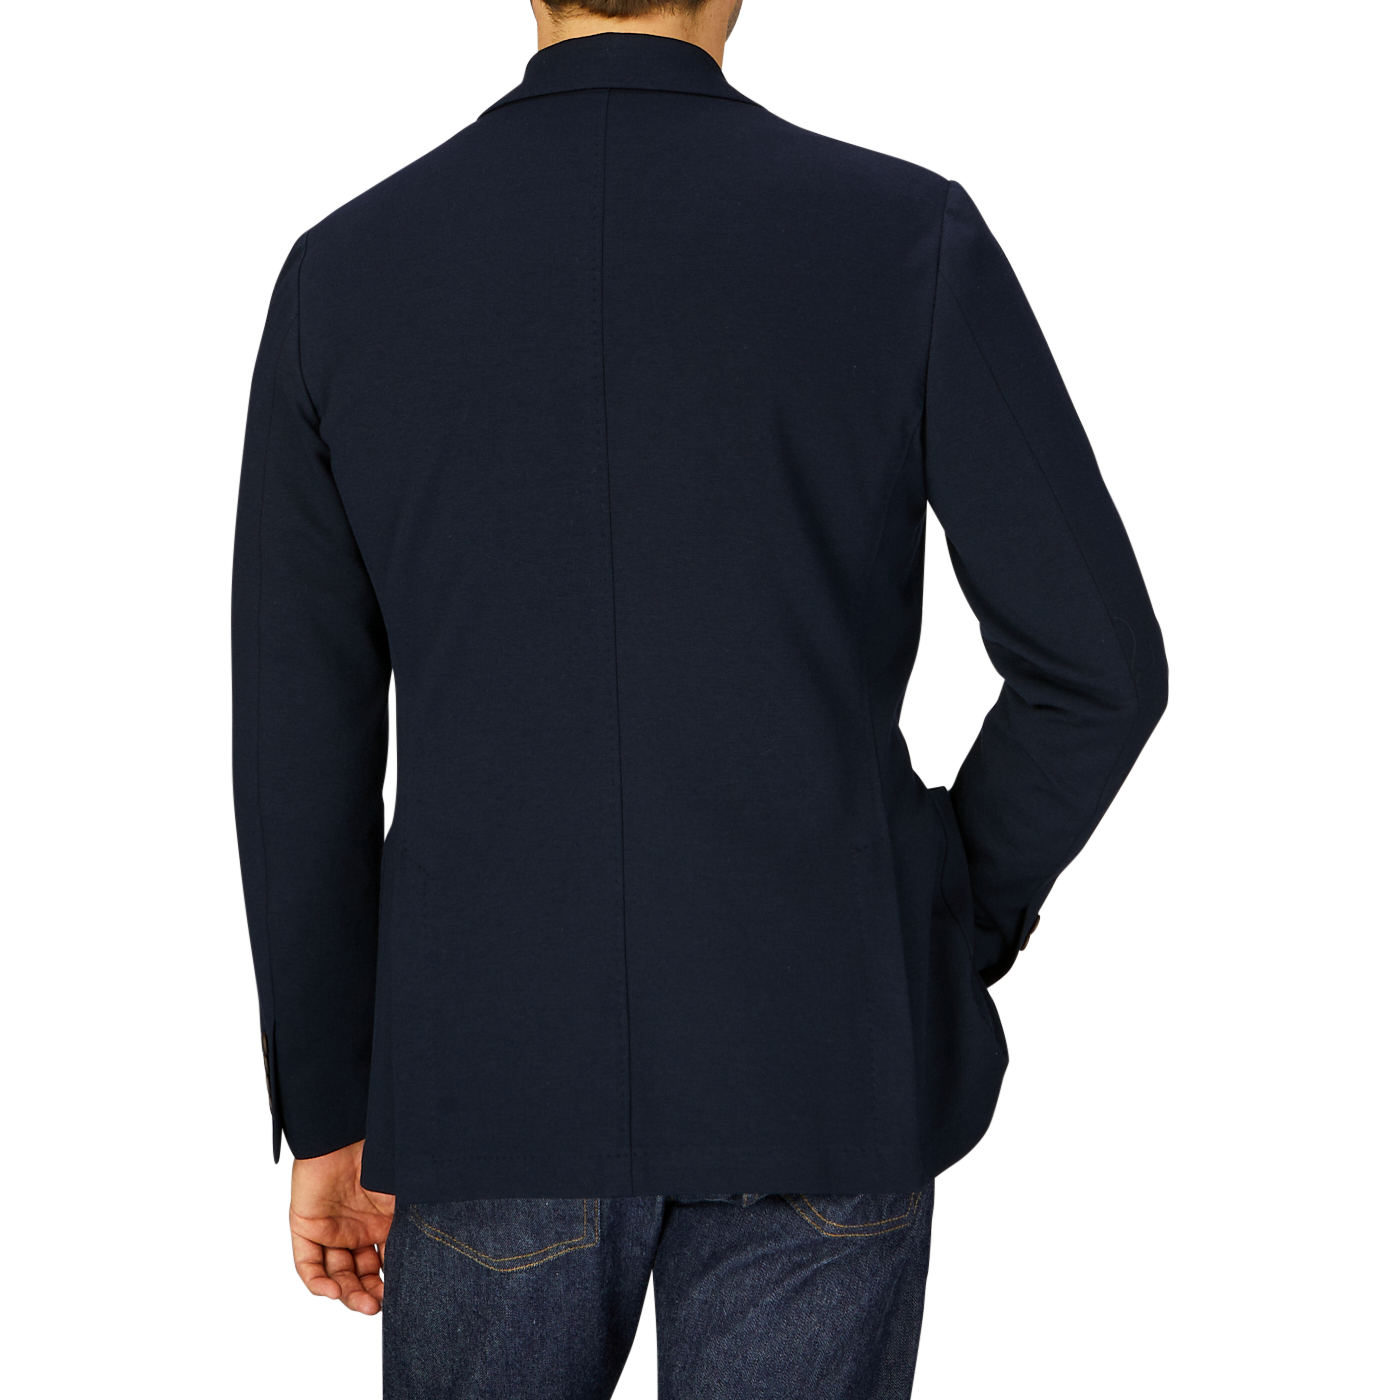 Man from behind wearing a Canali navy cotton jersey unconstructed blazer crafted with casual tailoring and denim jeans.